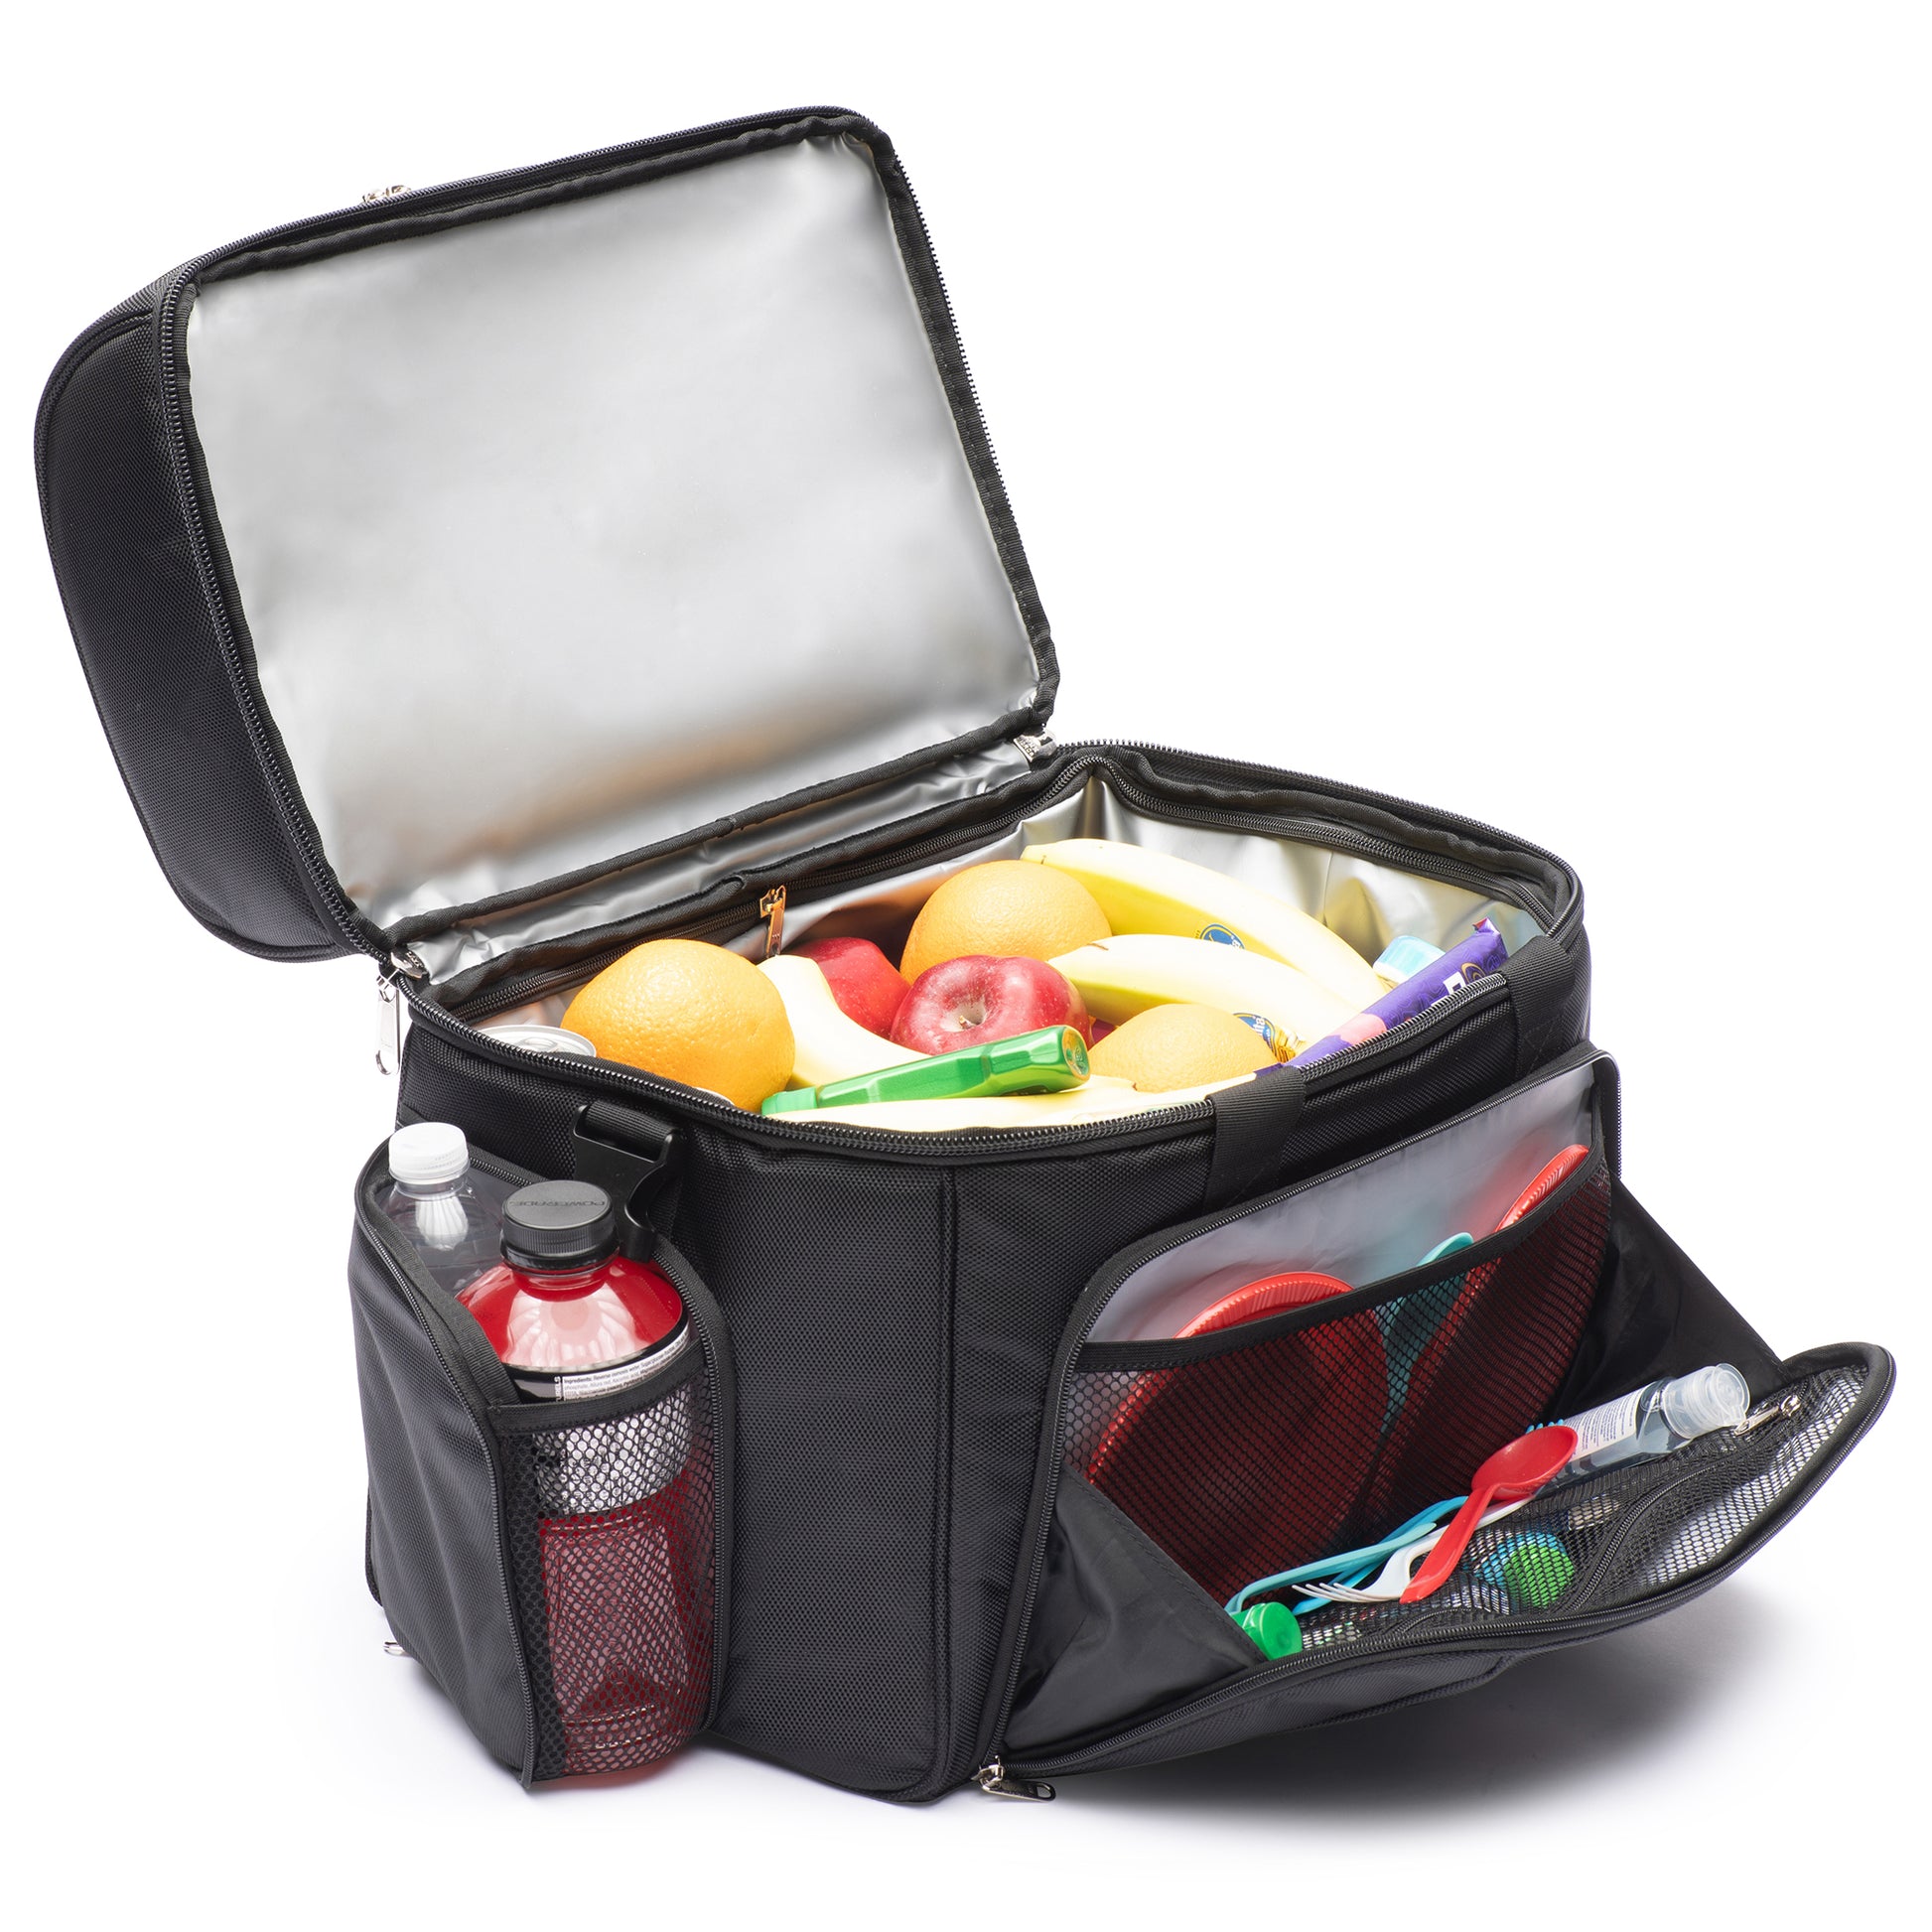 MOJECTO Extra Large Cooler Bag with Leakproof Hard India